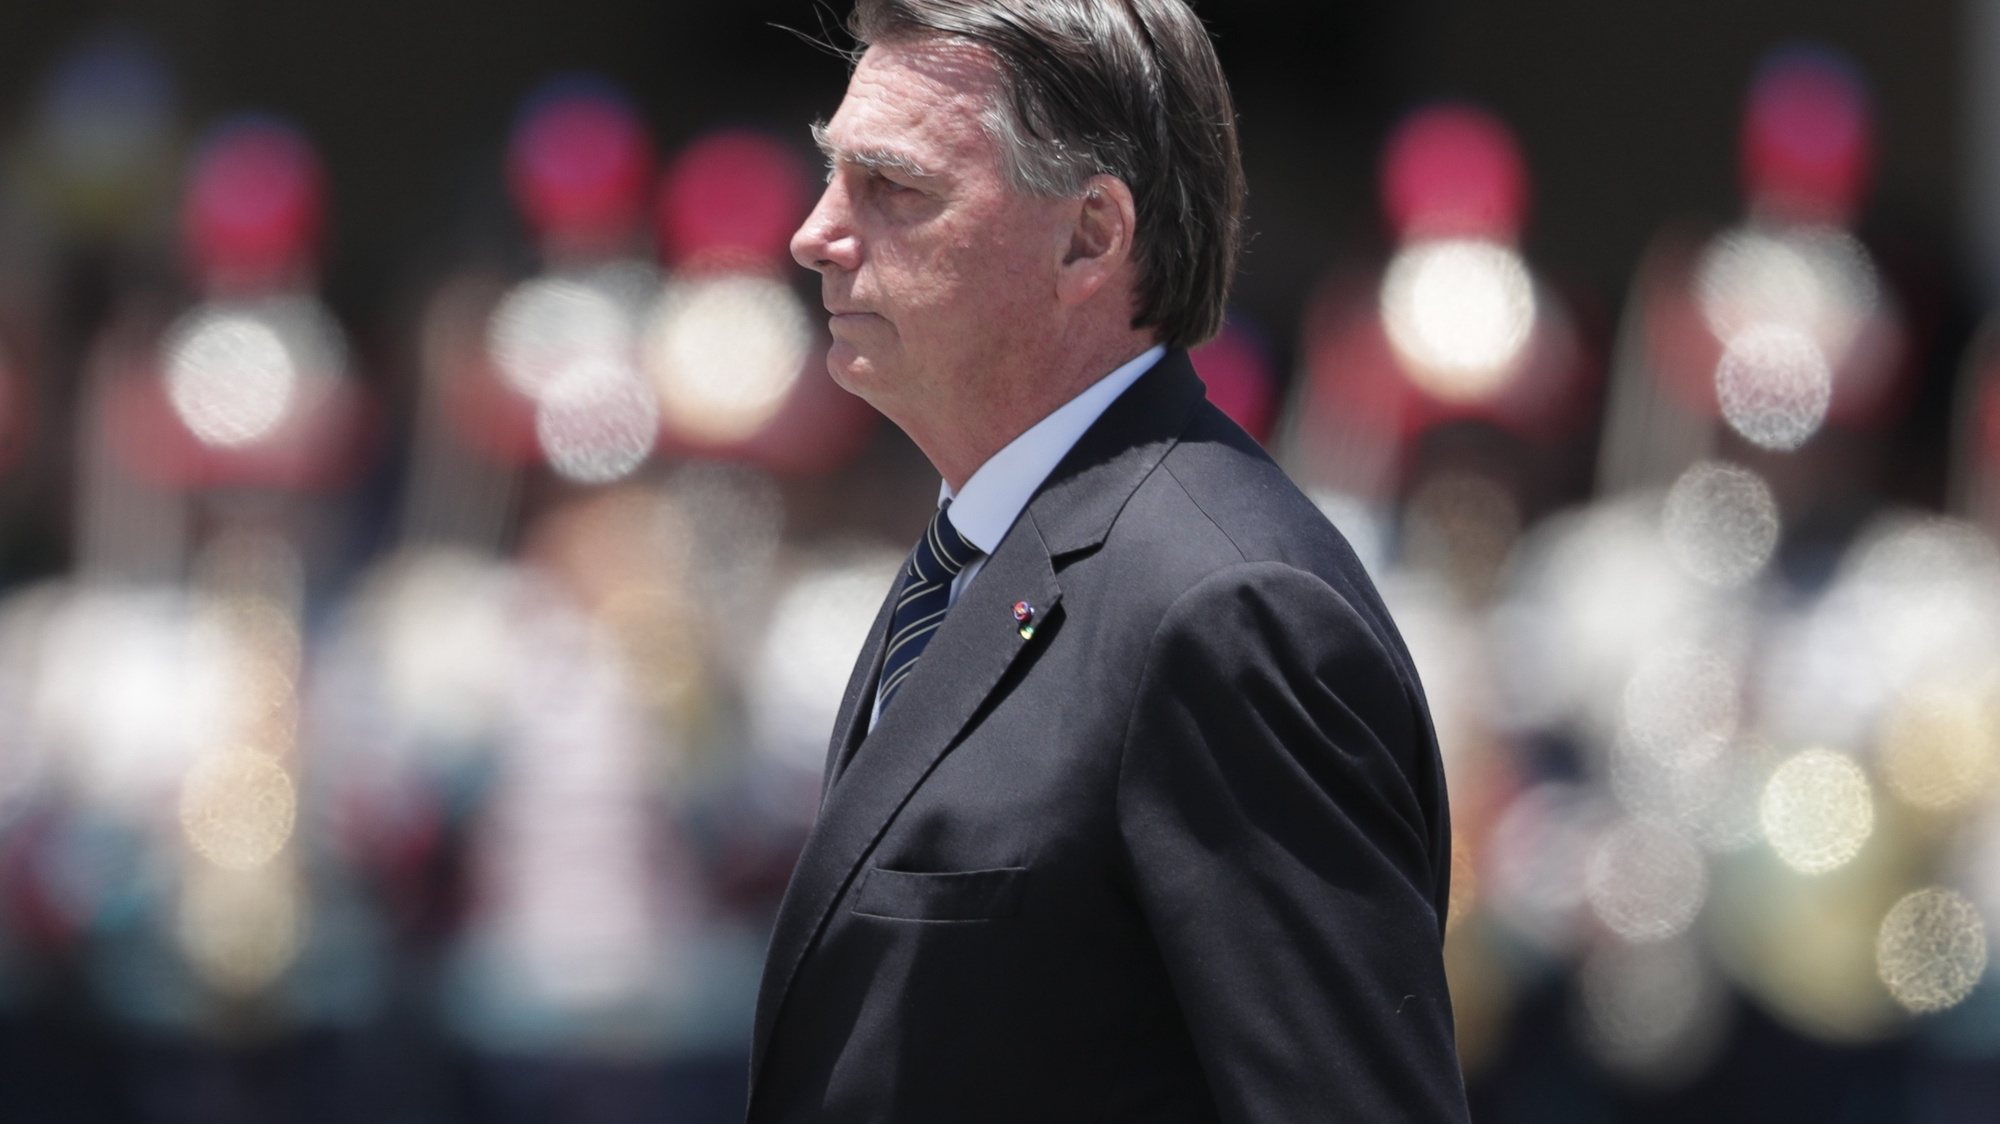 epa10330872 The President of Brazil, Jair Bolsonaro, participates in the graduation ceremony for new cadets of the Agujas Negras Military Academy, in Rio de Janeiro, Brazil, 26 November 2022. The Brazilian president, Jair Bolsonaro, reappeared in public this 26 November, for the first time since he was defeated at the polls by Luiz InÃ¡cio Lula da Silva, at a military ceremony, in which he remained silent. Bolsonaro led a graduation ceremony for new cadets from the Agujas Negras Military Academy, in the city of Resende, in the interior of the state of Rio de Janeiro, where he himself trained as a soldier, in 1977.  EPA/ANDRE COELHO